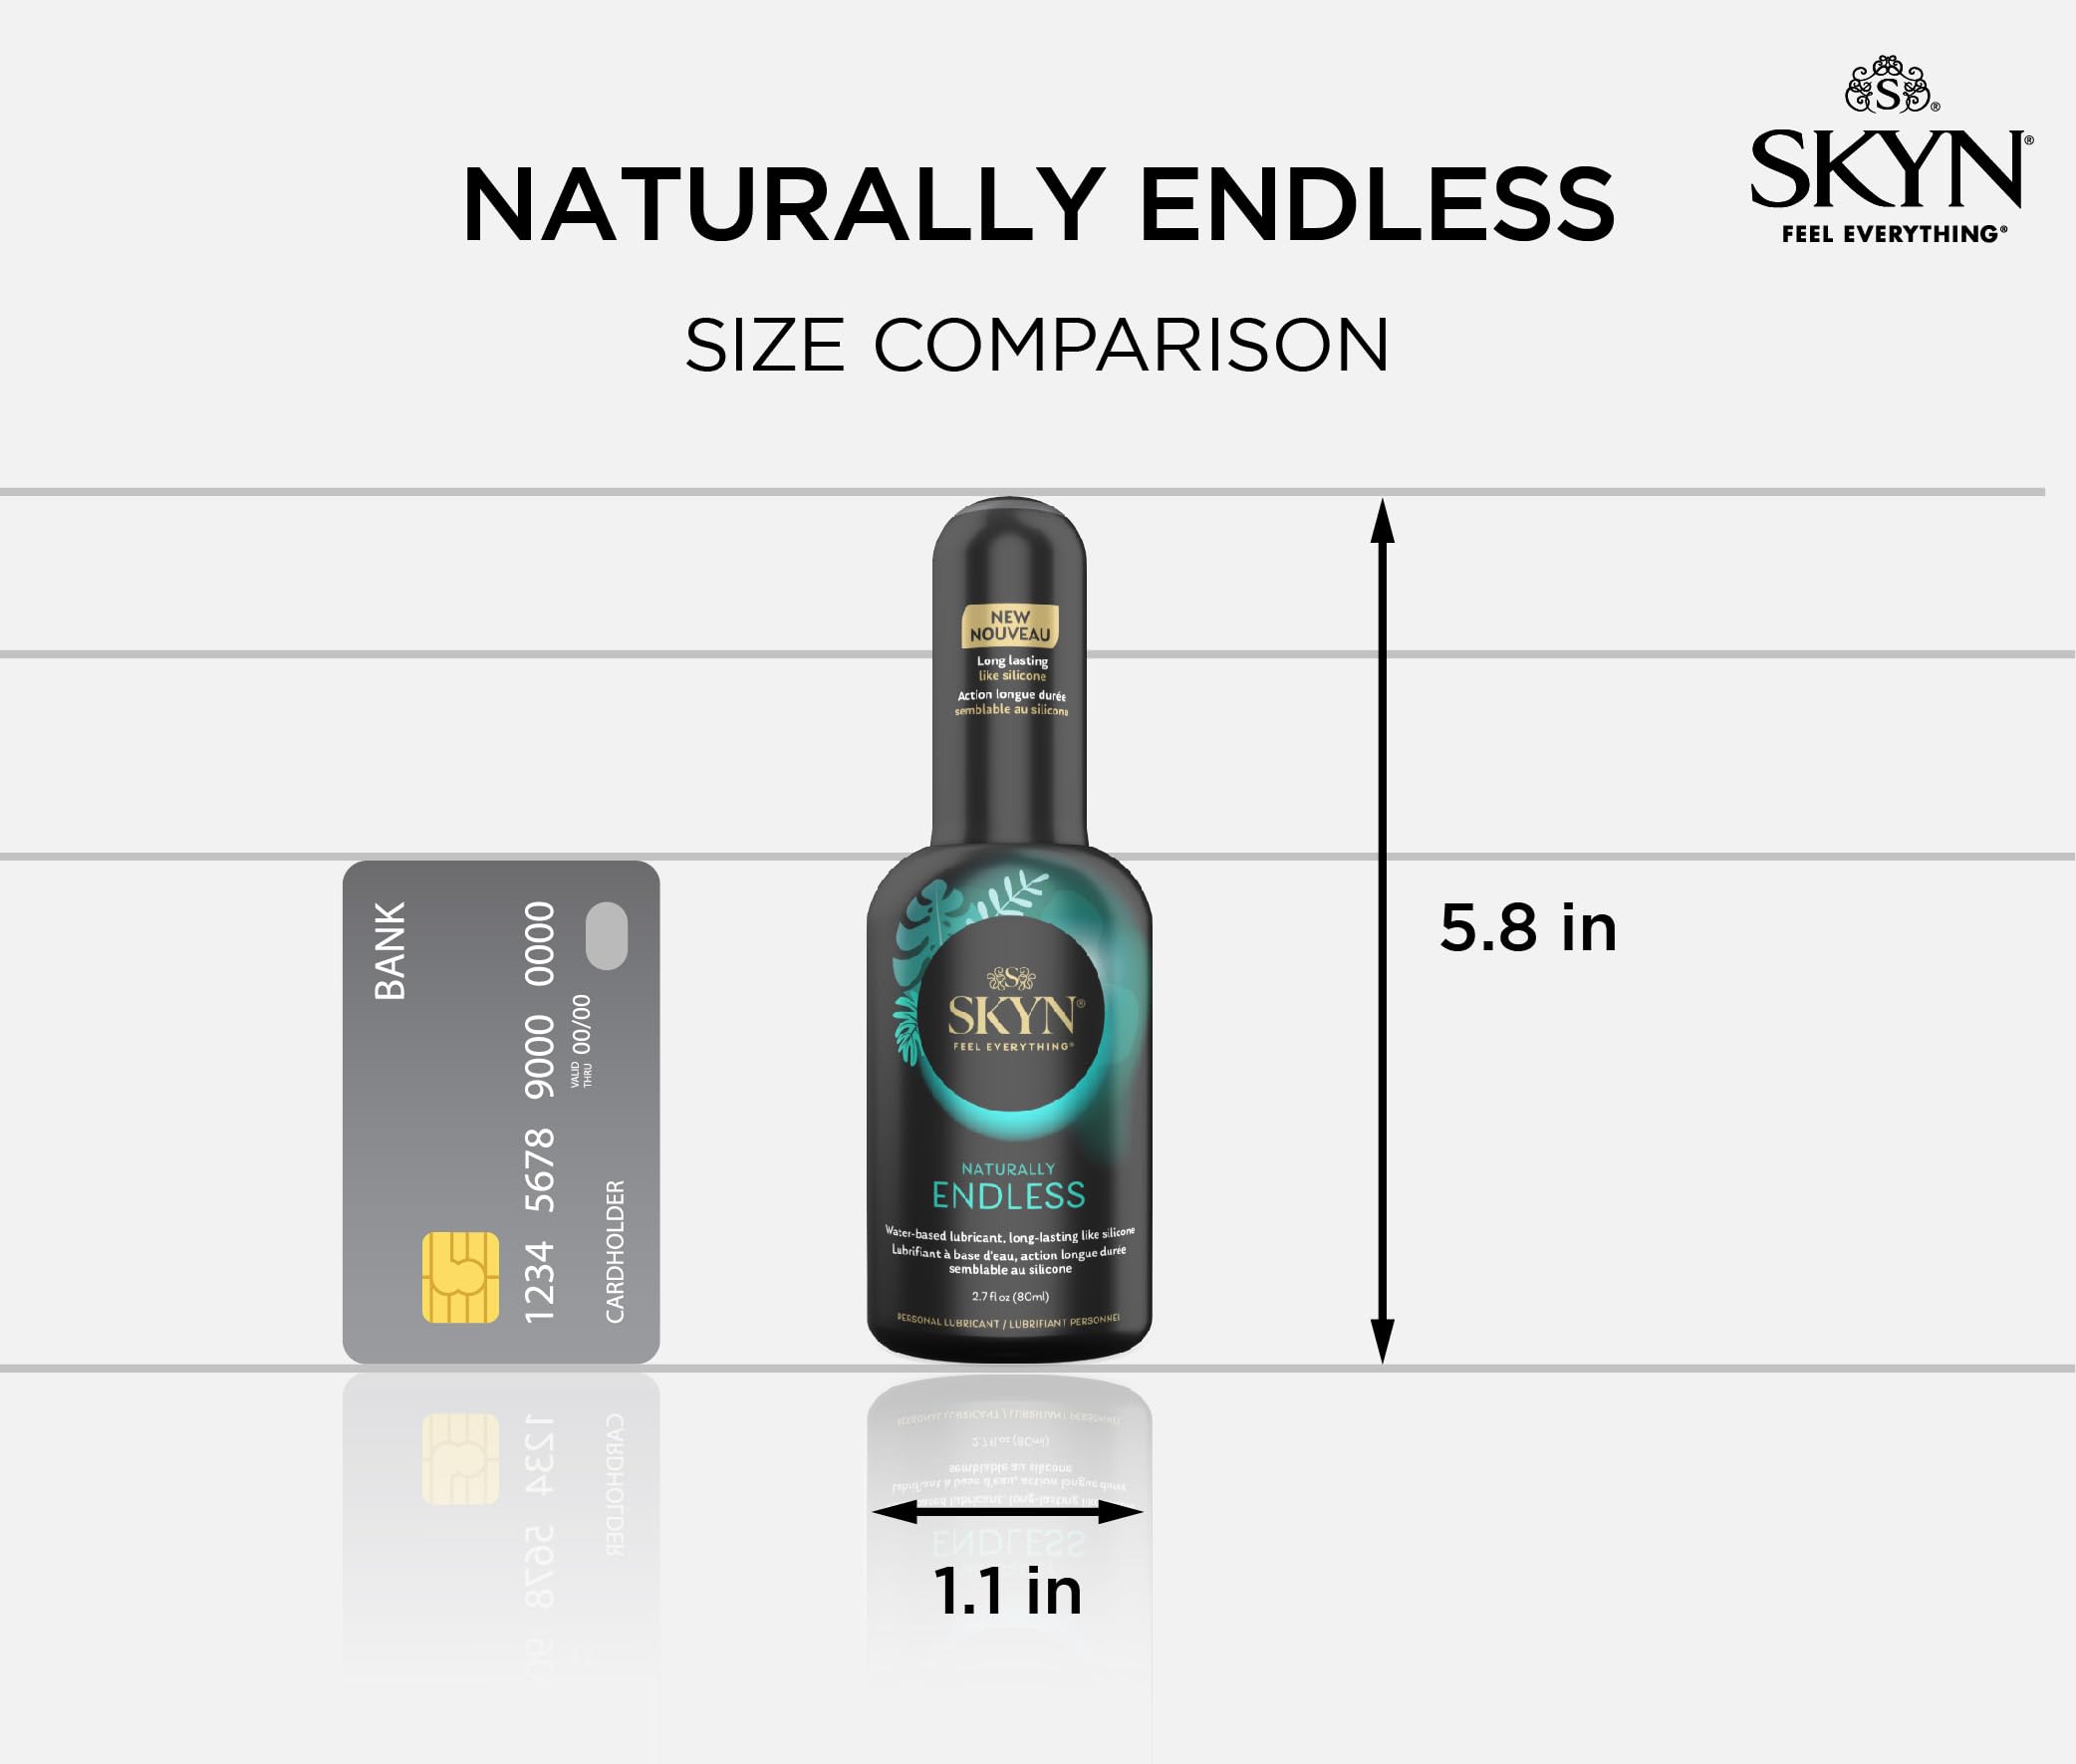 SKYN Naturally Endless Personal Lubricant - 2.7 fl. oz - Long Lasting Water-Based Lube, Safe with Latex and Polyisoprene Condoms & Personal Massagers